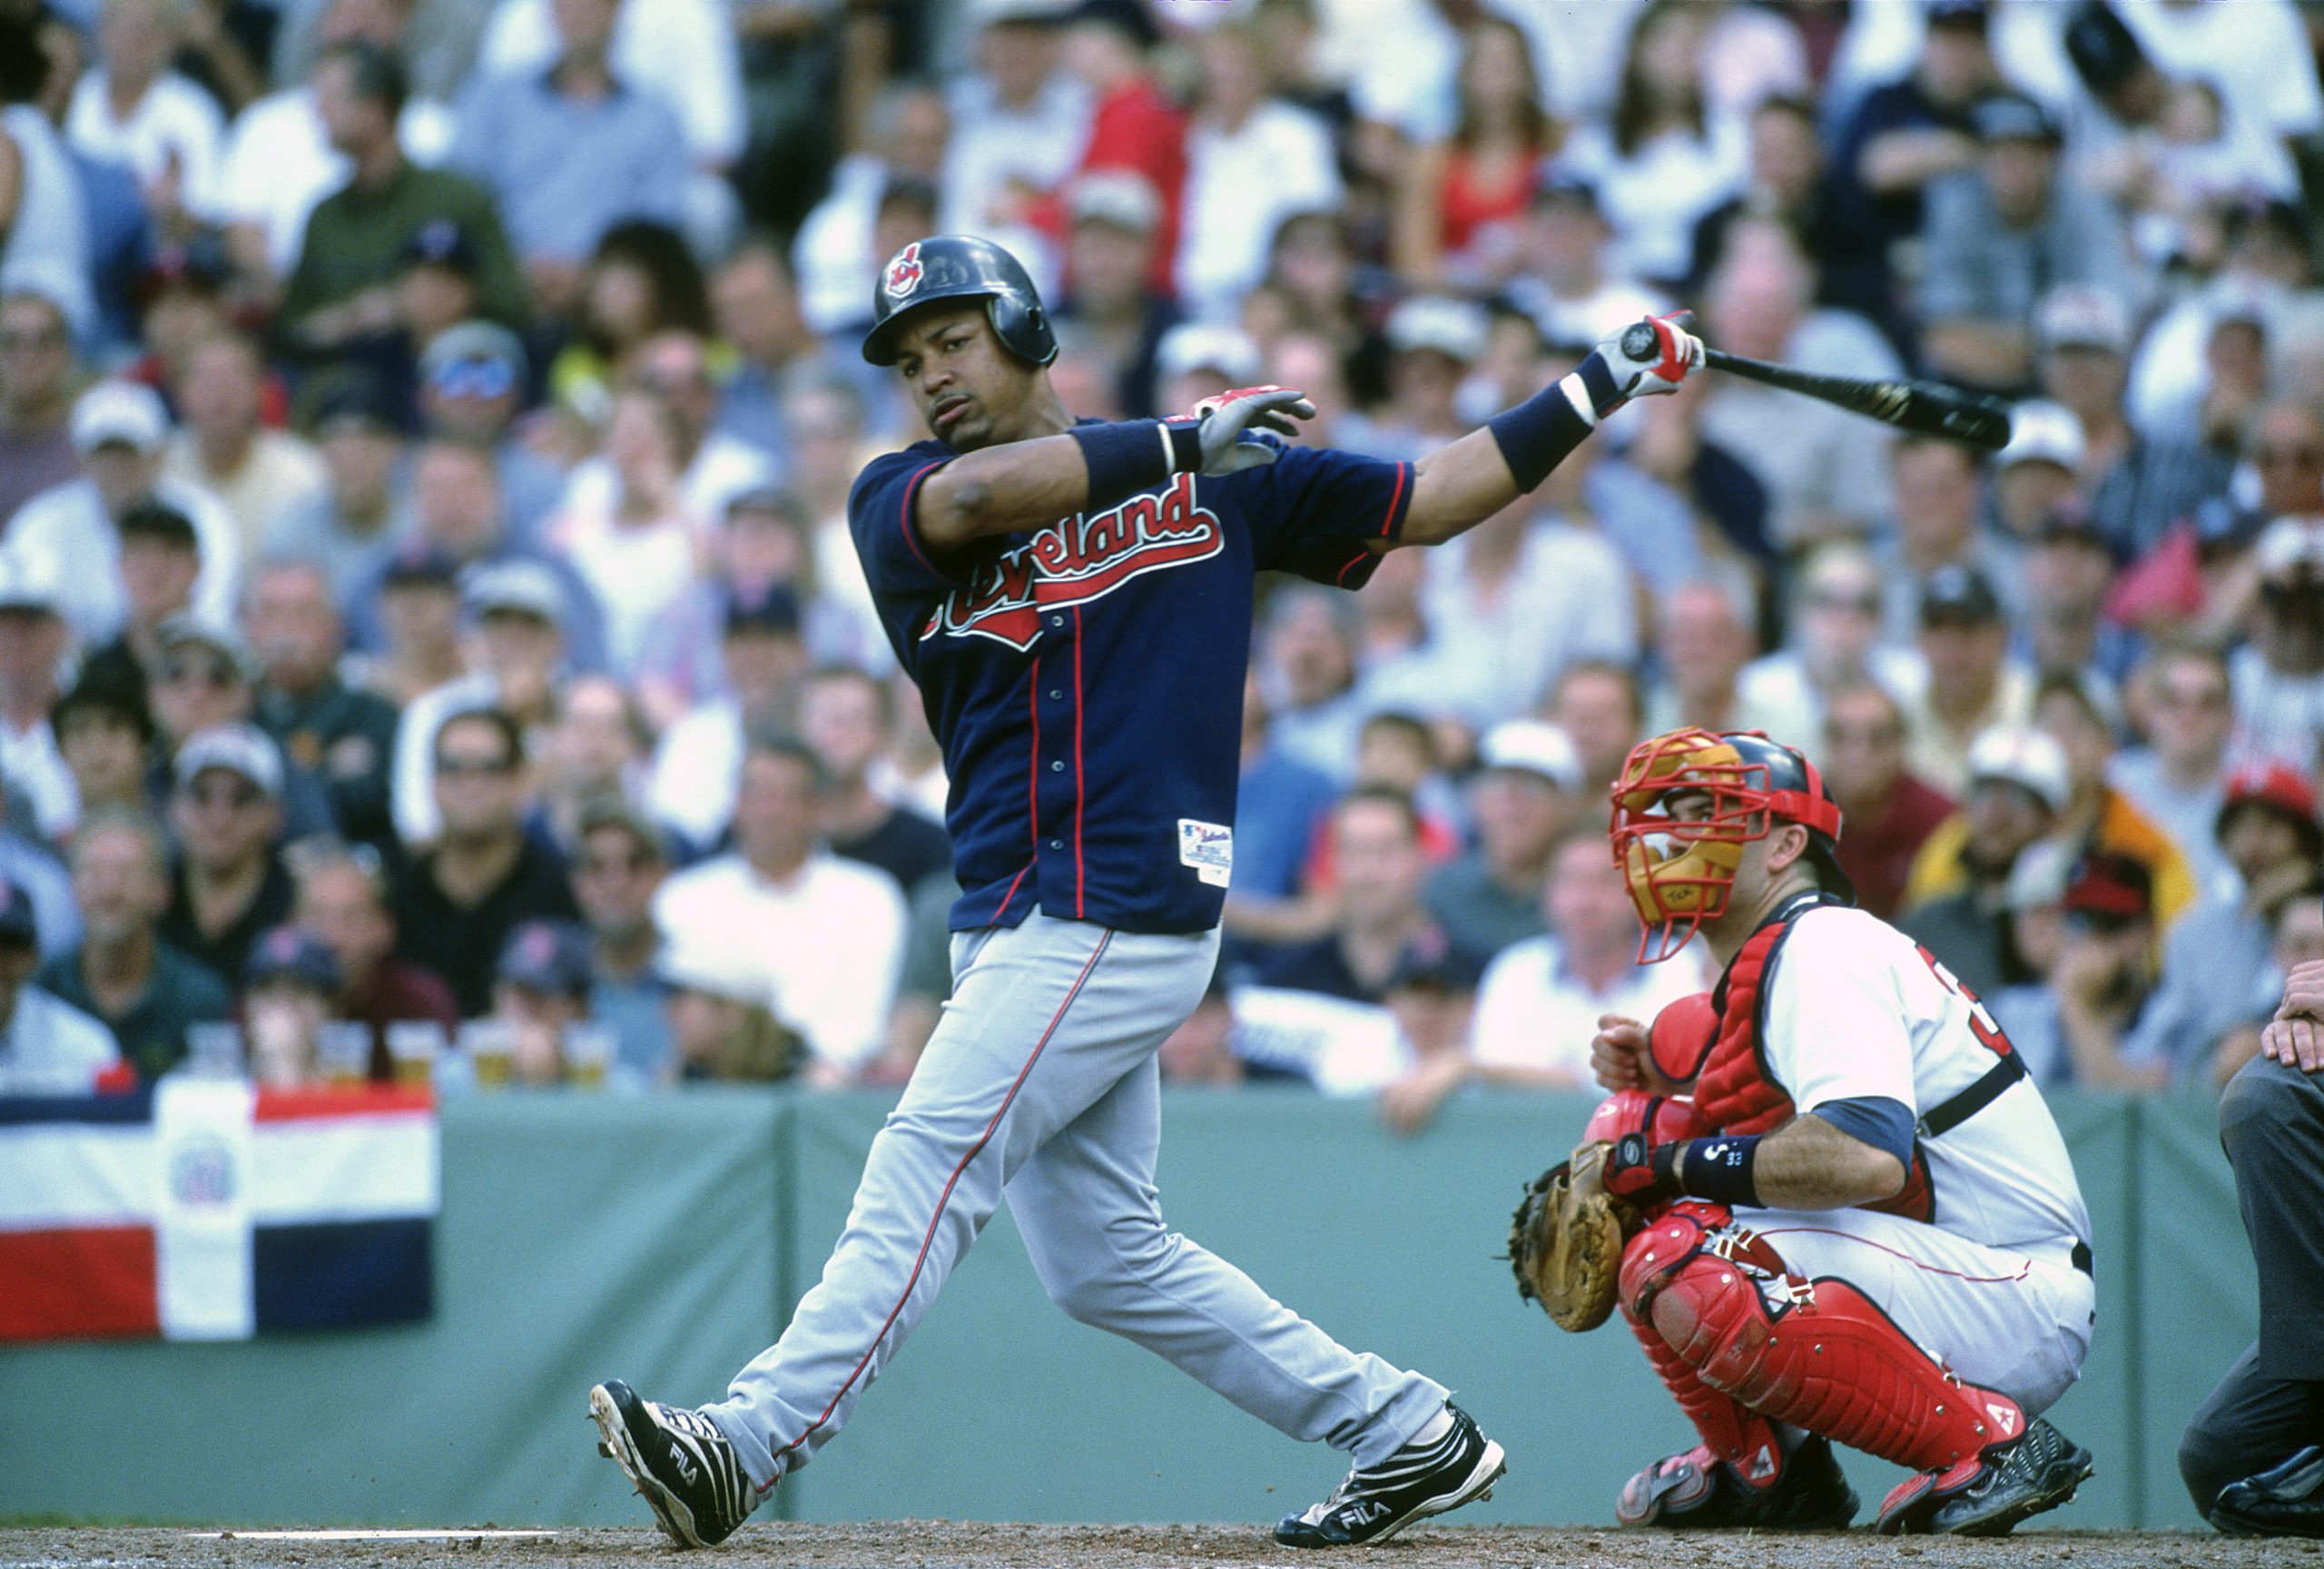 Manny Ramirez of the Cleveland Indians bats against the Boston Red Sox.